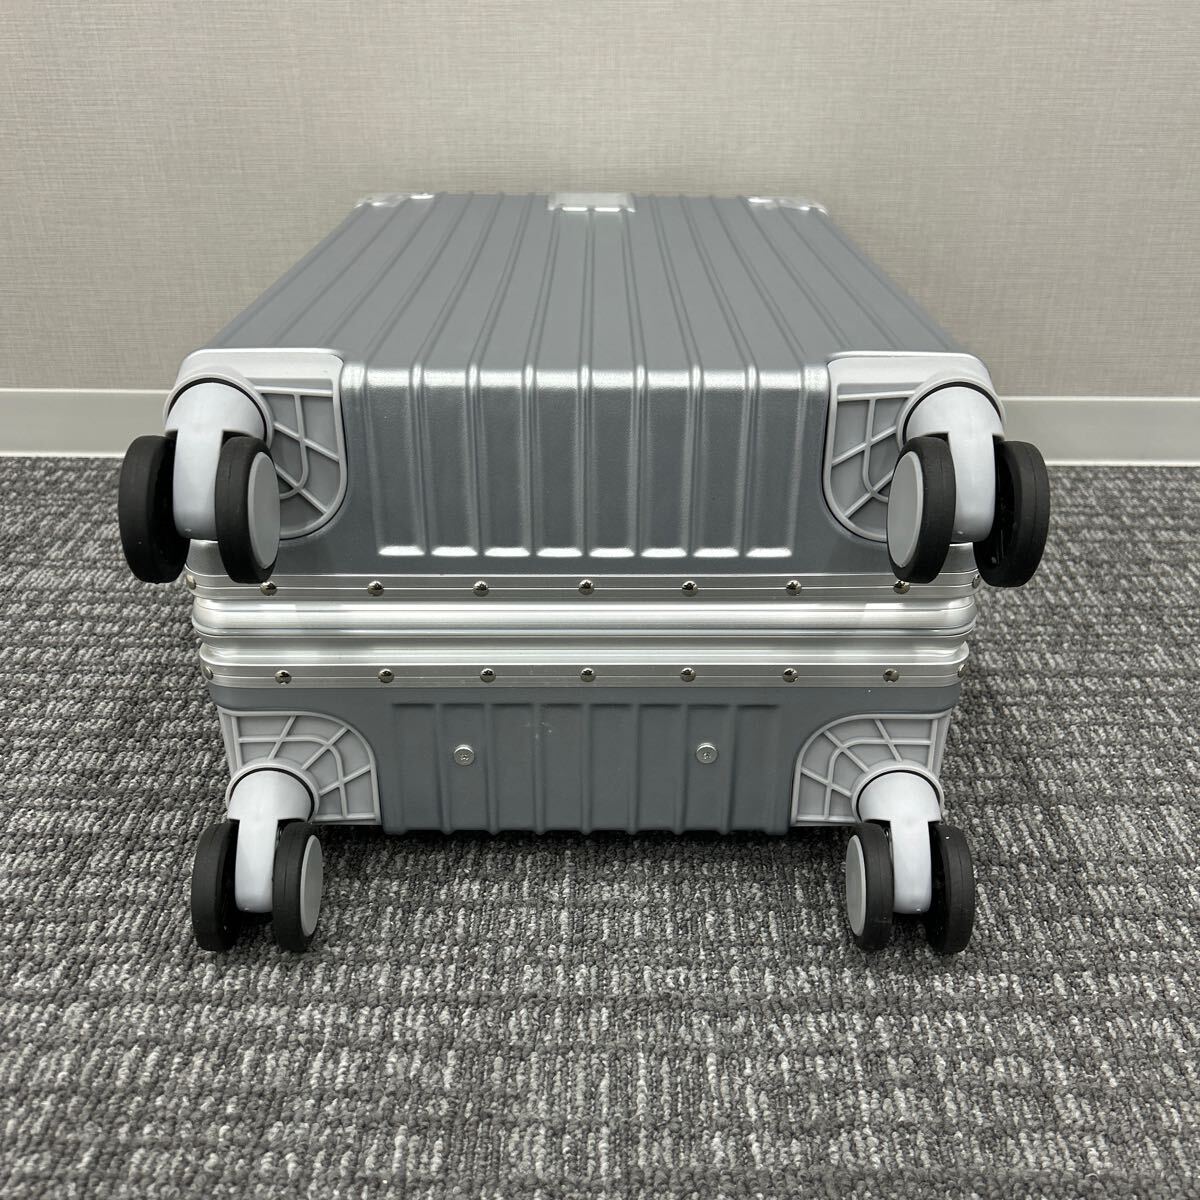  Carry case suitcase machine inside bringing in 40L carry bag silver 